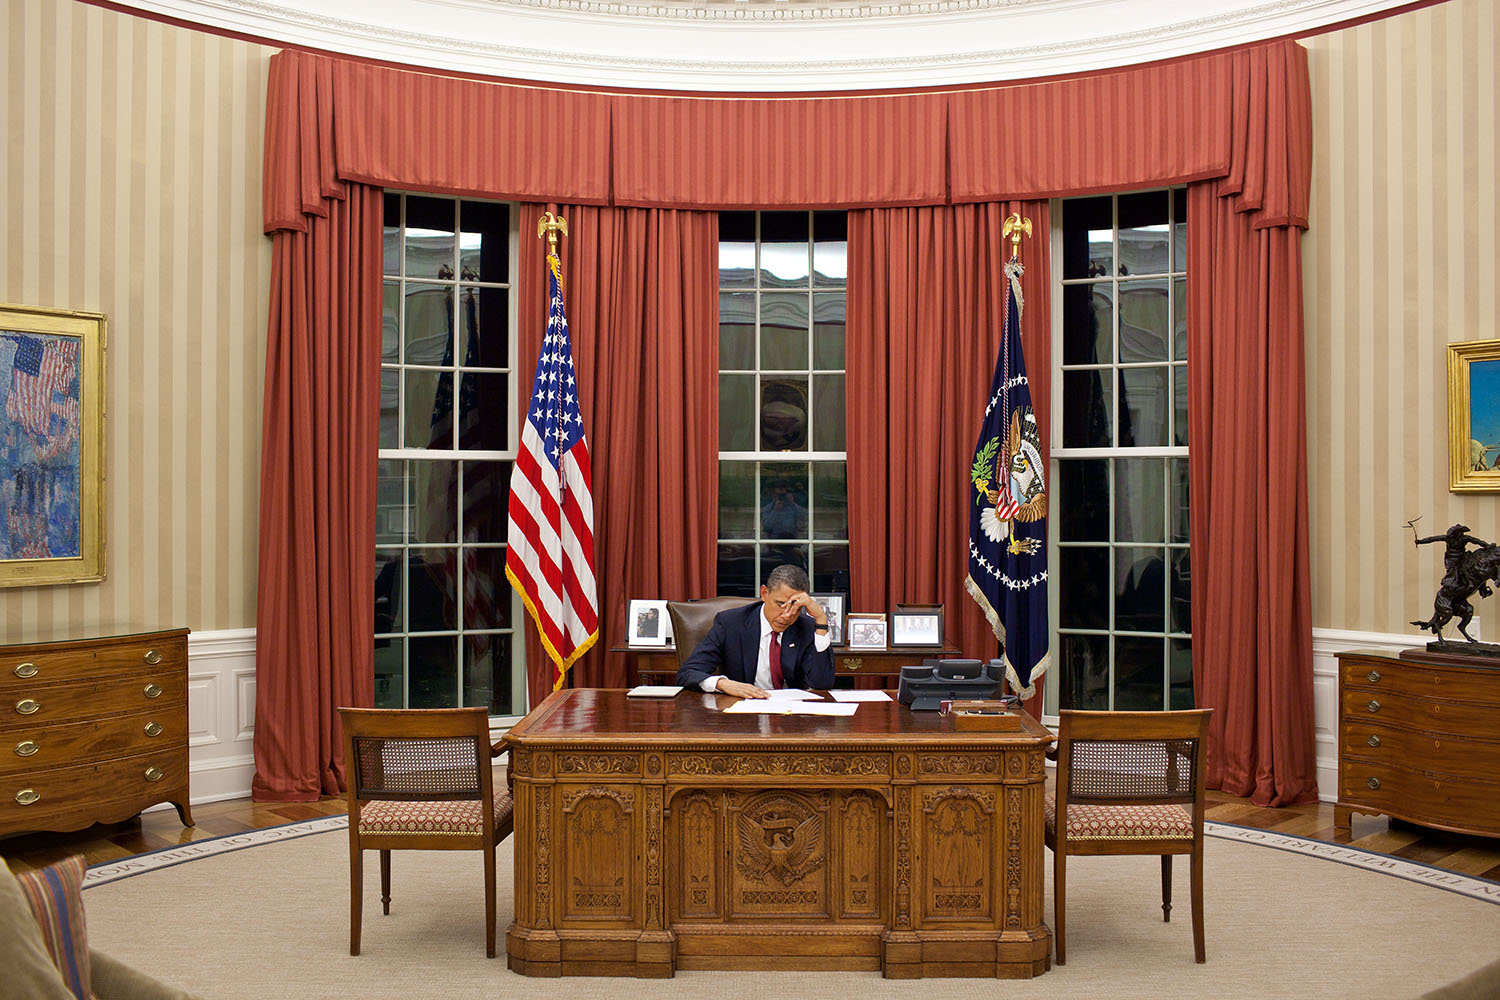 President Obama in the Oval Office prior to the Bin Laden statement